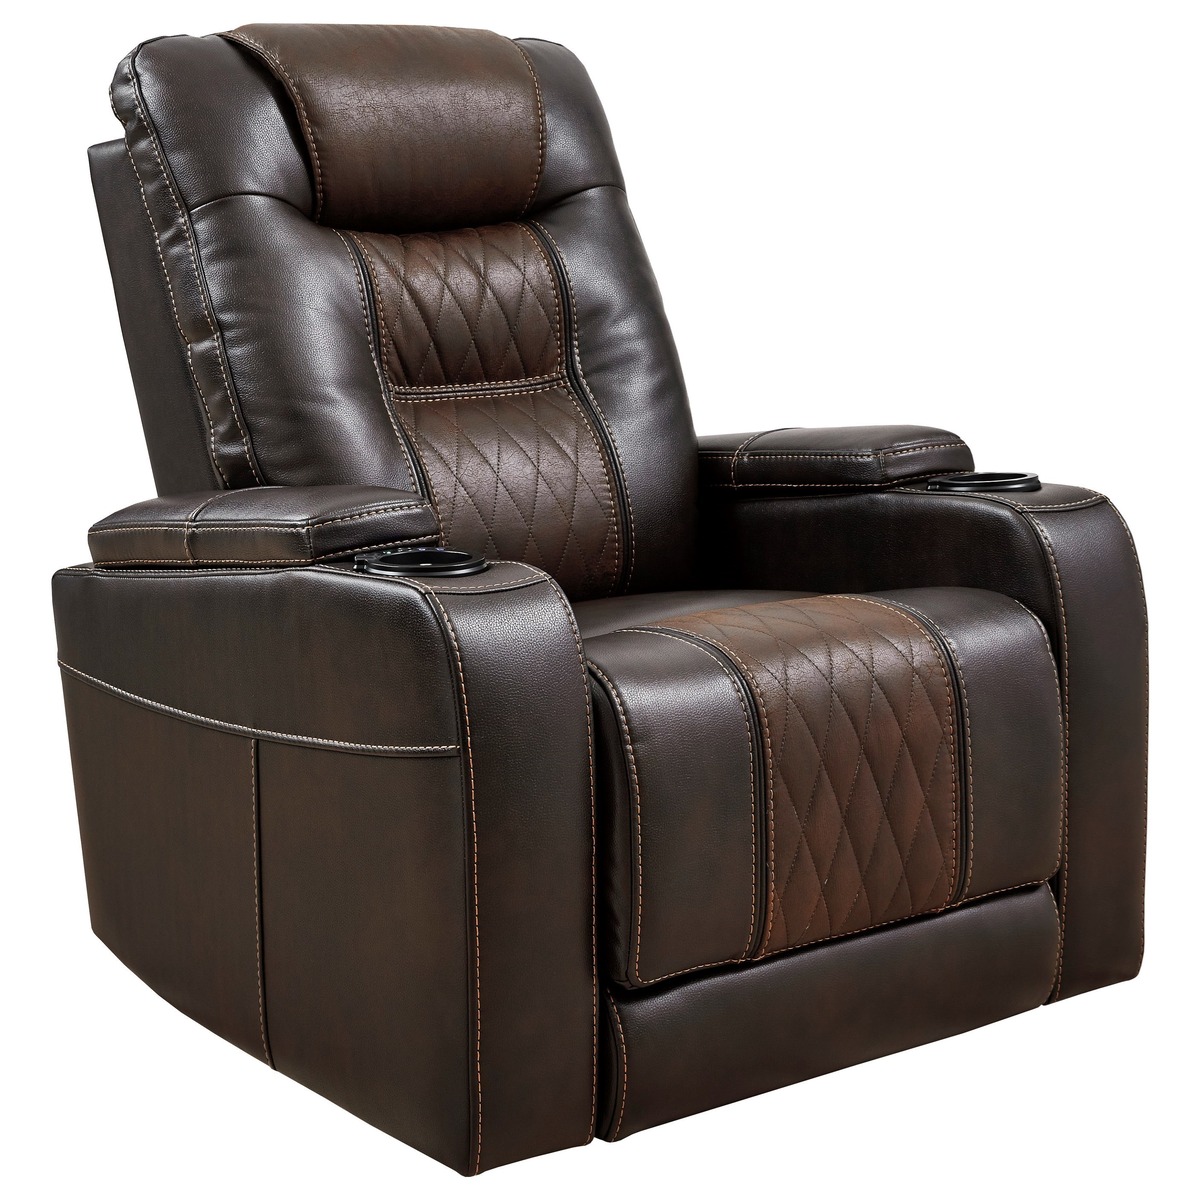 What Is The Best Power Recliner Chair